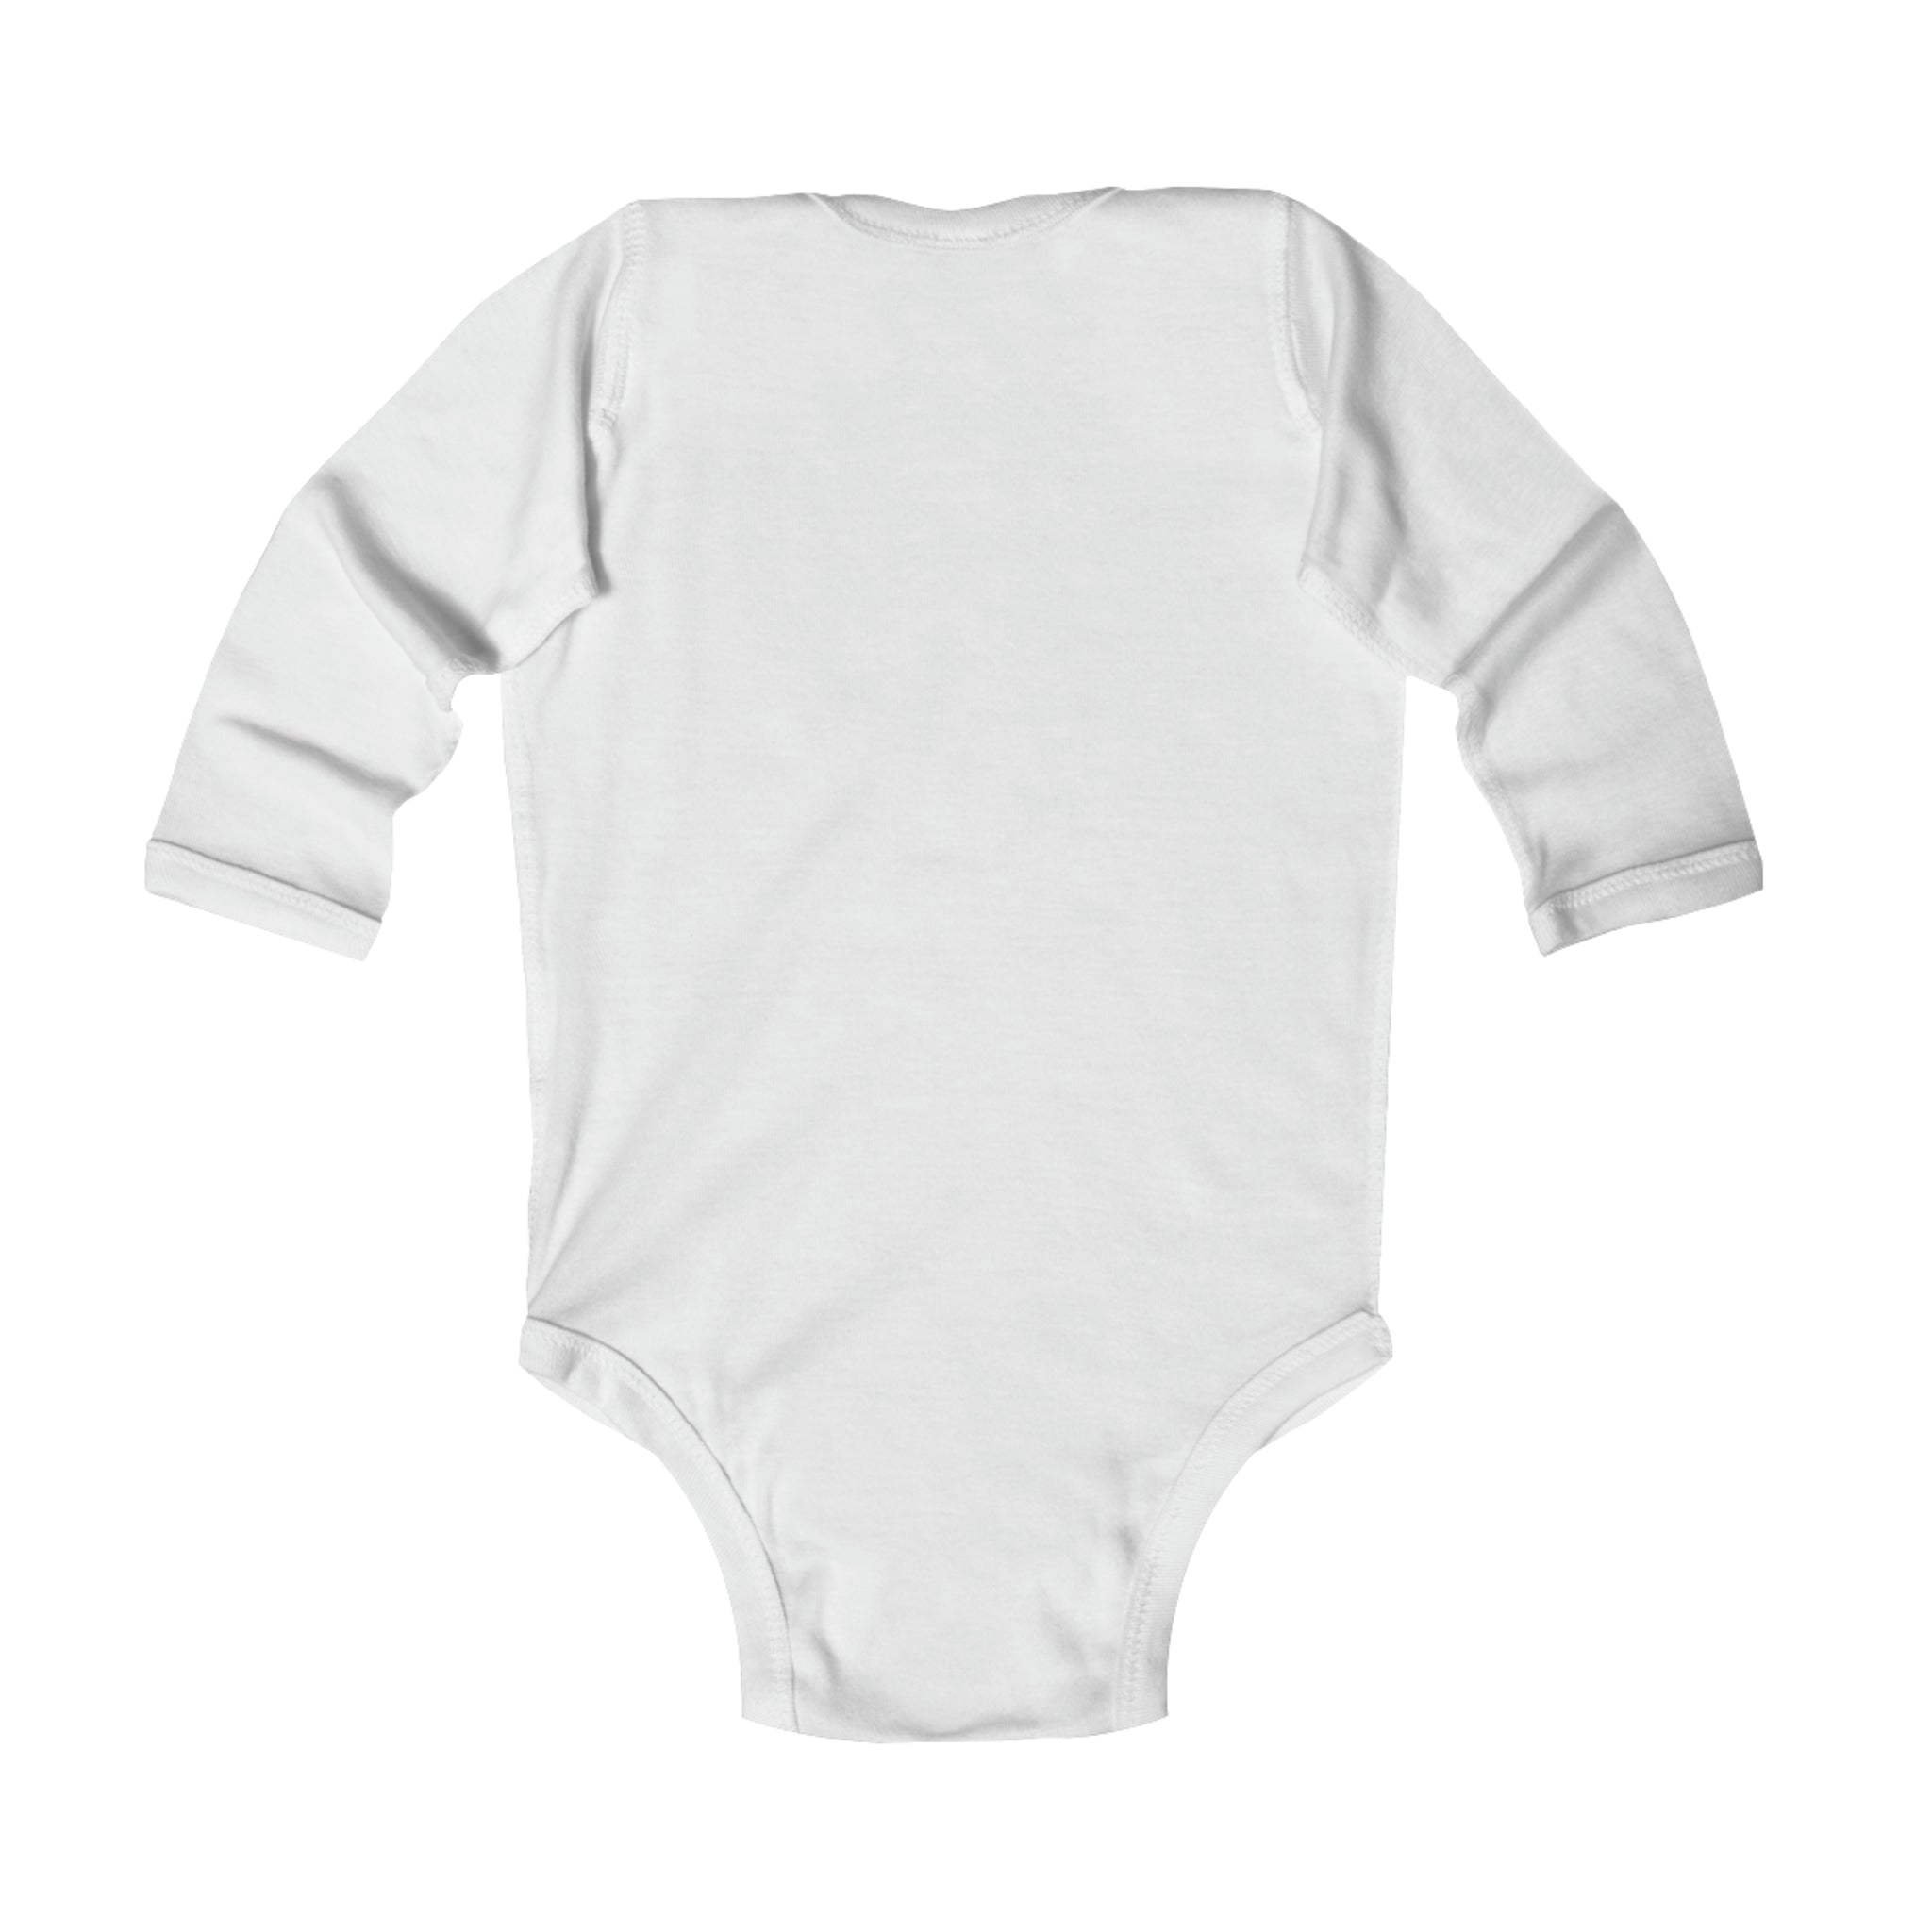 I dont stop when Im tired I stop when Im done Infant Long Sleeve Bodysuit